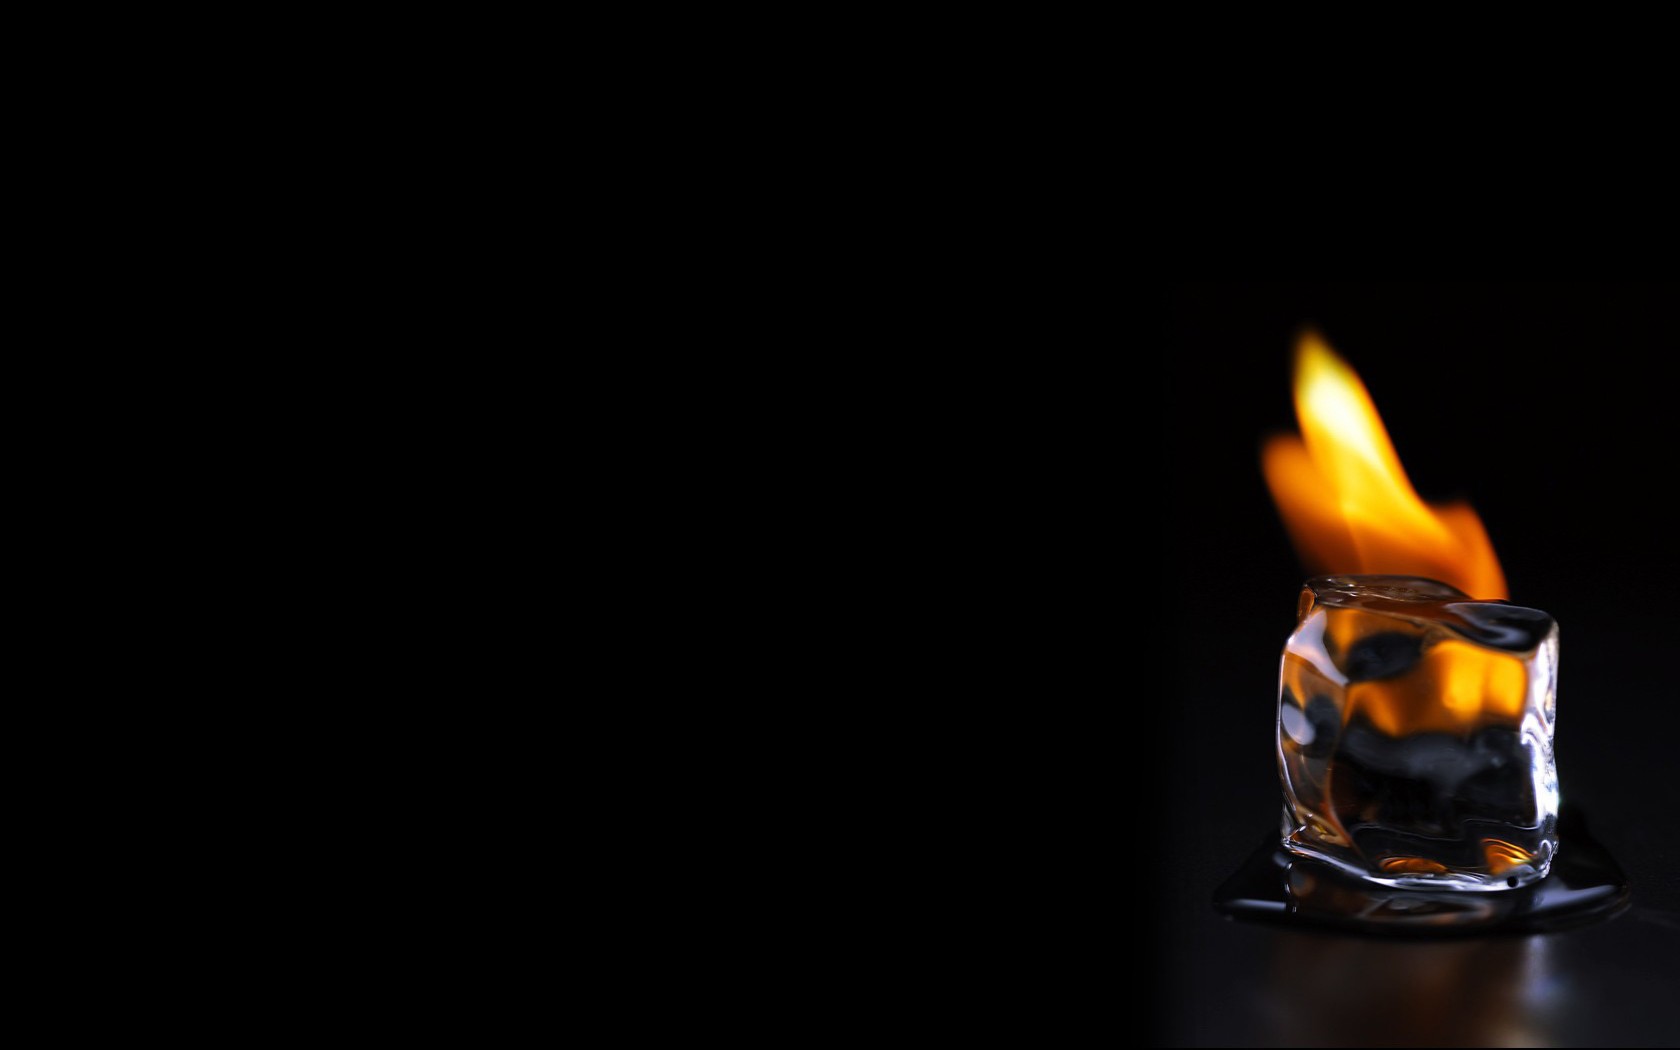 Wallpaper : drink, fire, ice cubes, candle, lighting, flame, darkness 1680x1050